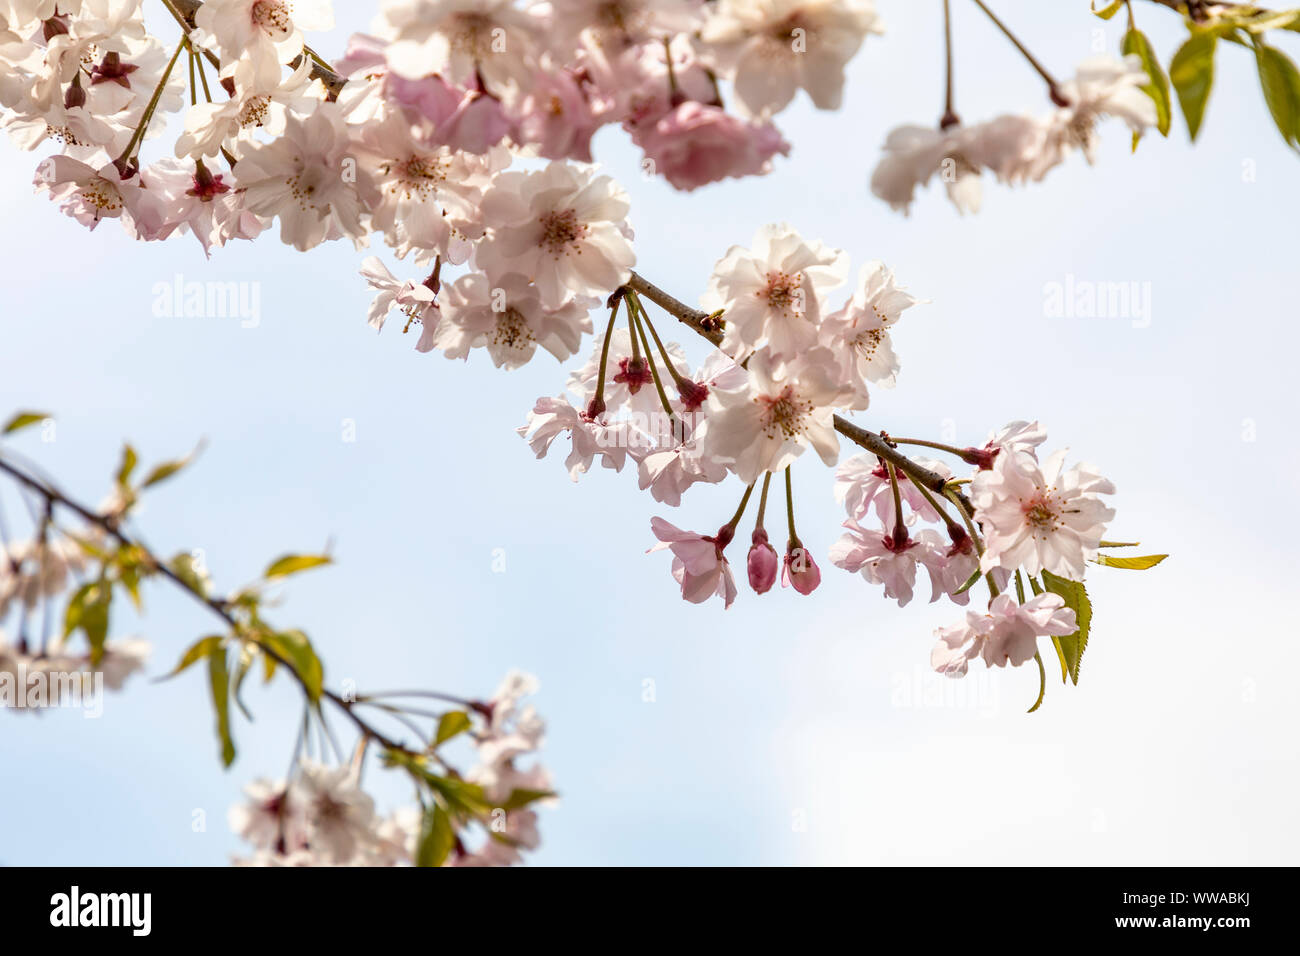 Cherry Blossom tree in bloom. Japan. Stock Photo